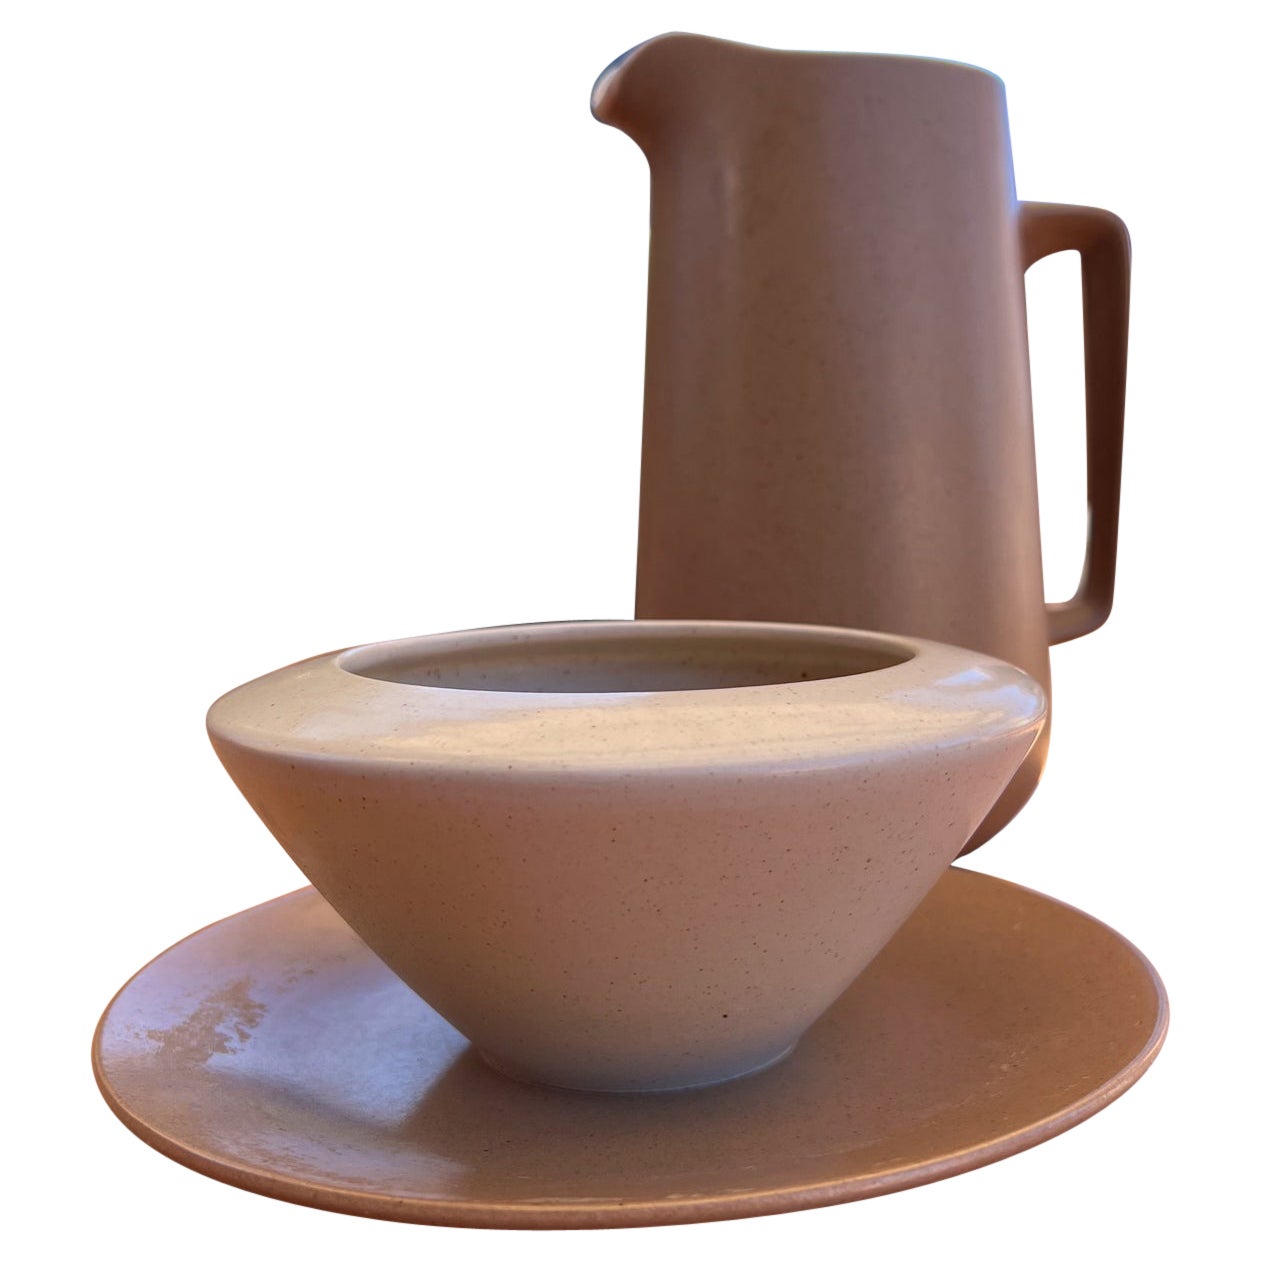 2000s Tan Two-tone Bowl and Saucer Gravy Boat
California Tempo Brown
by METLOX - POPPYTRAIL - VERNON
8 diameter x 3.5 h
Preowned vintage condition. 
See all images
Metlox pitcher sold separately.